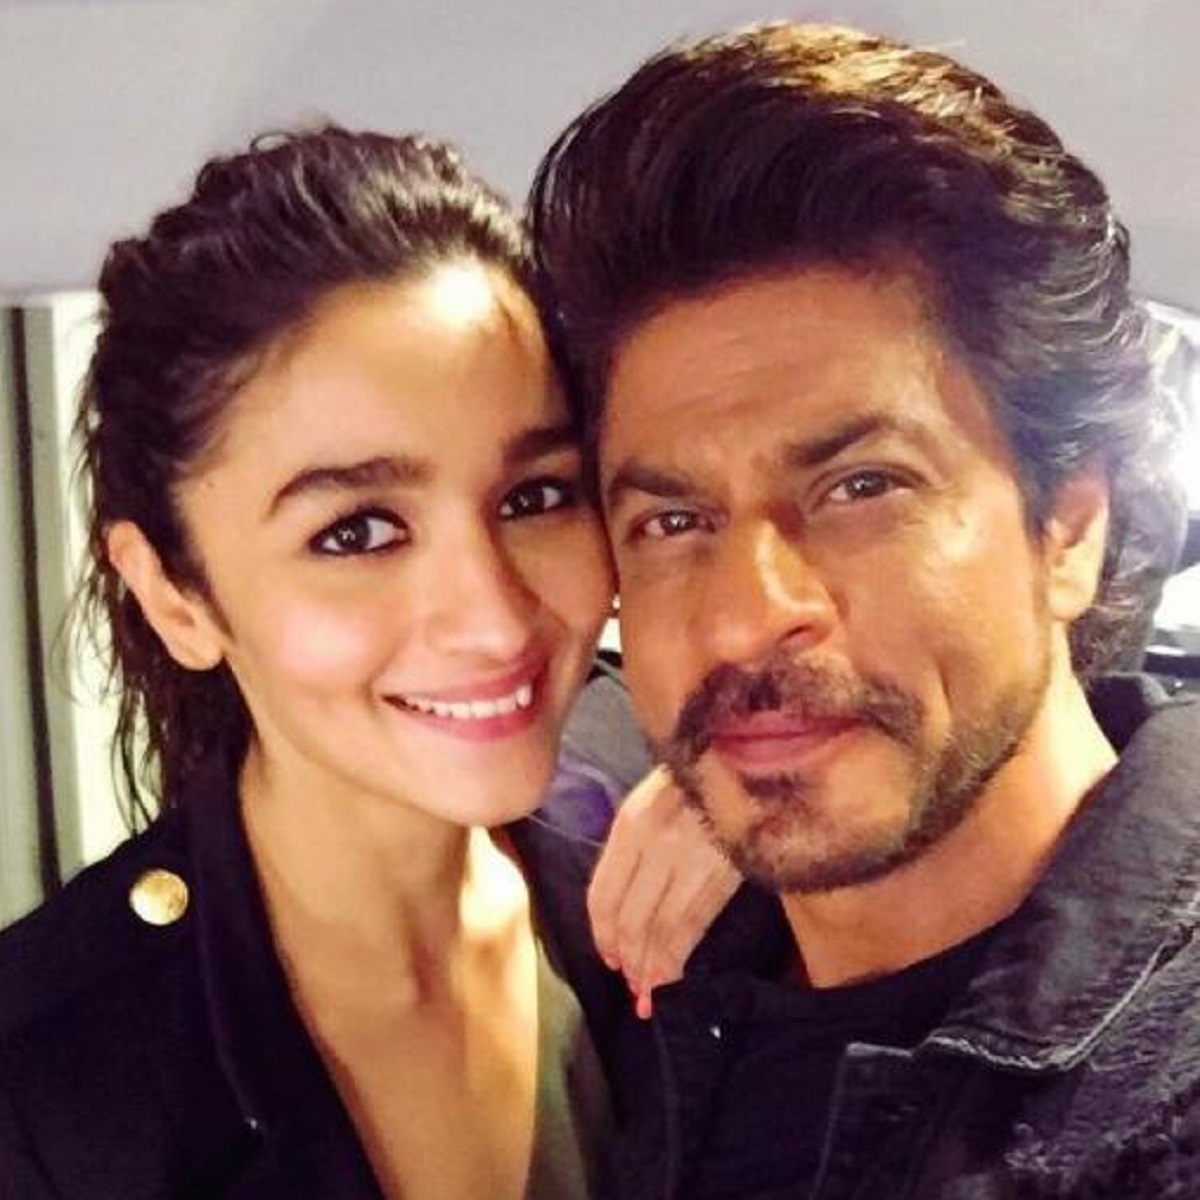 EXCLUSIVE: Shah Rukh Khan’s production, Darlings, with Alia Bhatt set to go on floors, announcement this week